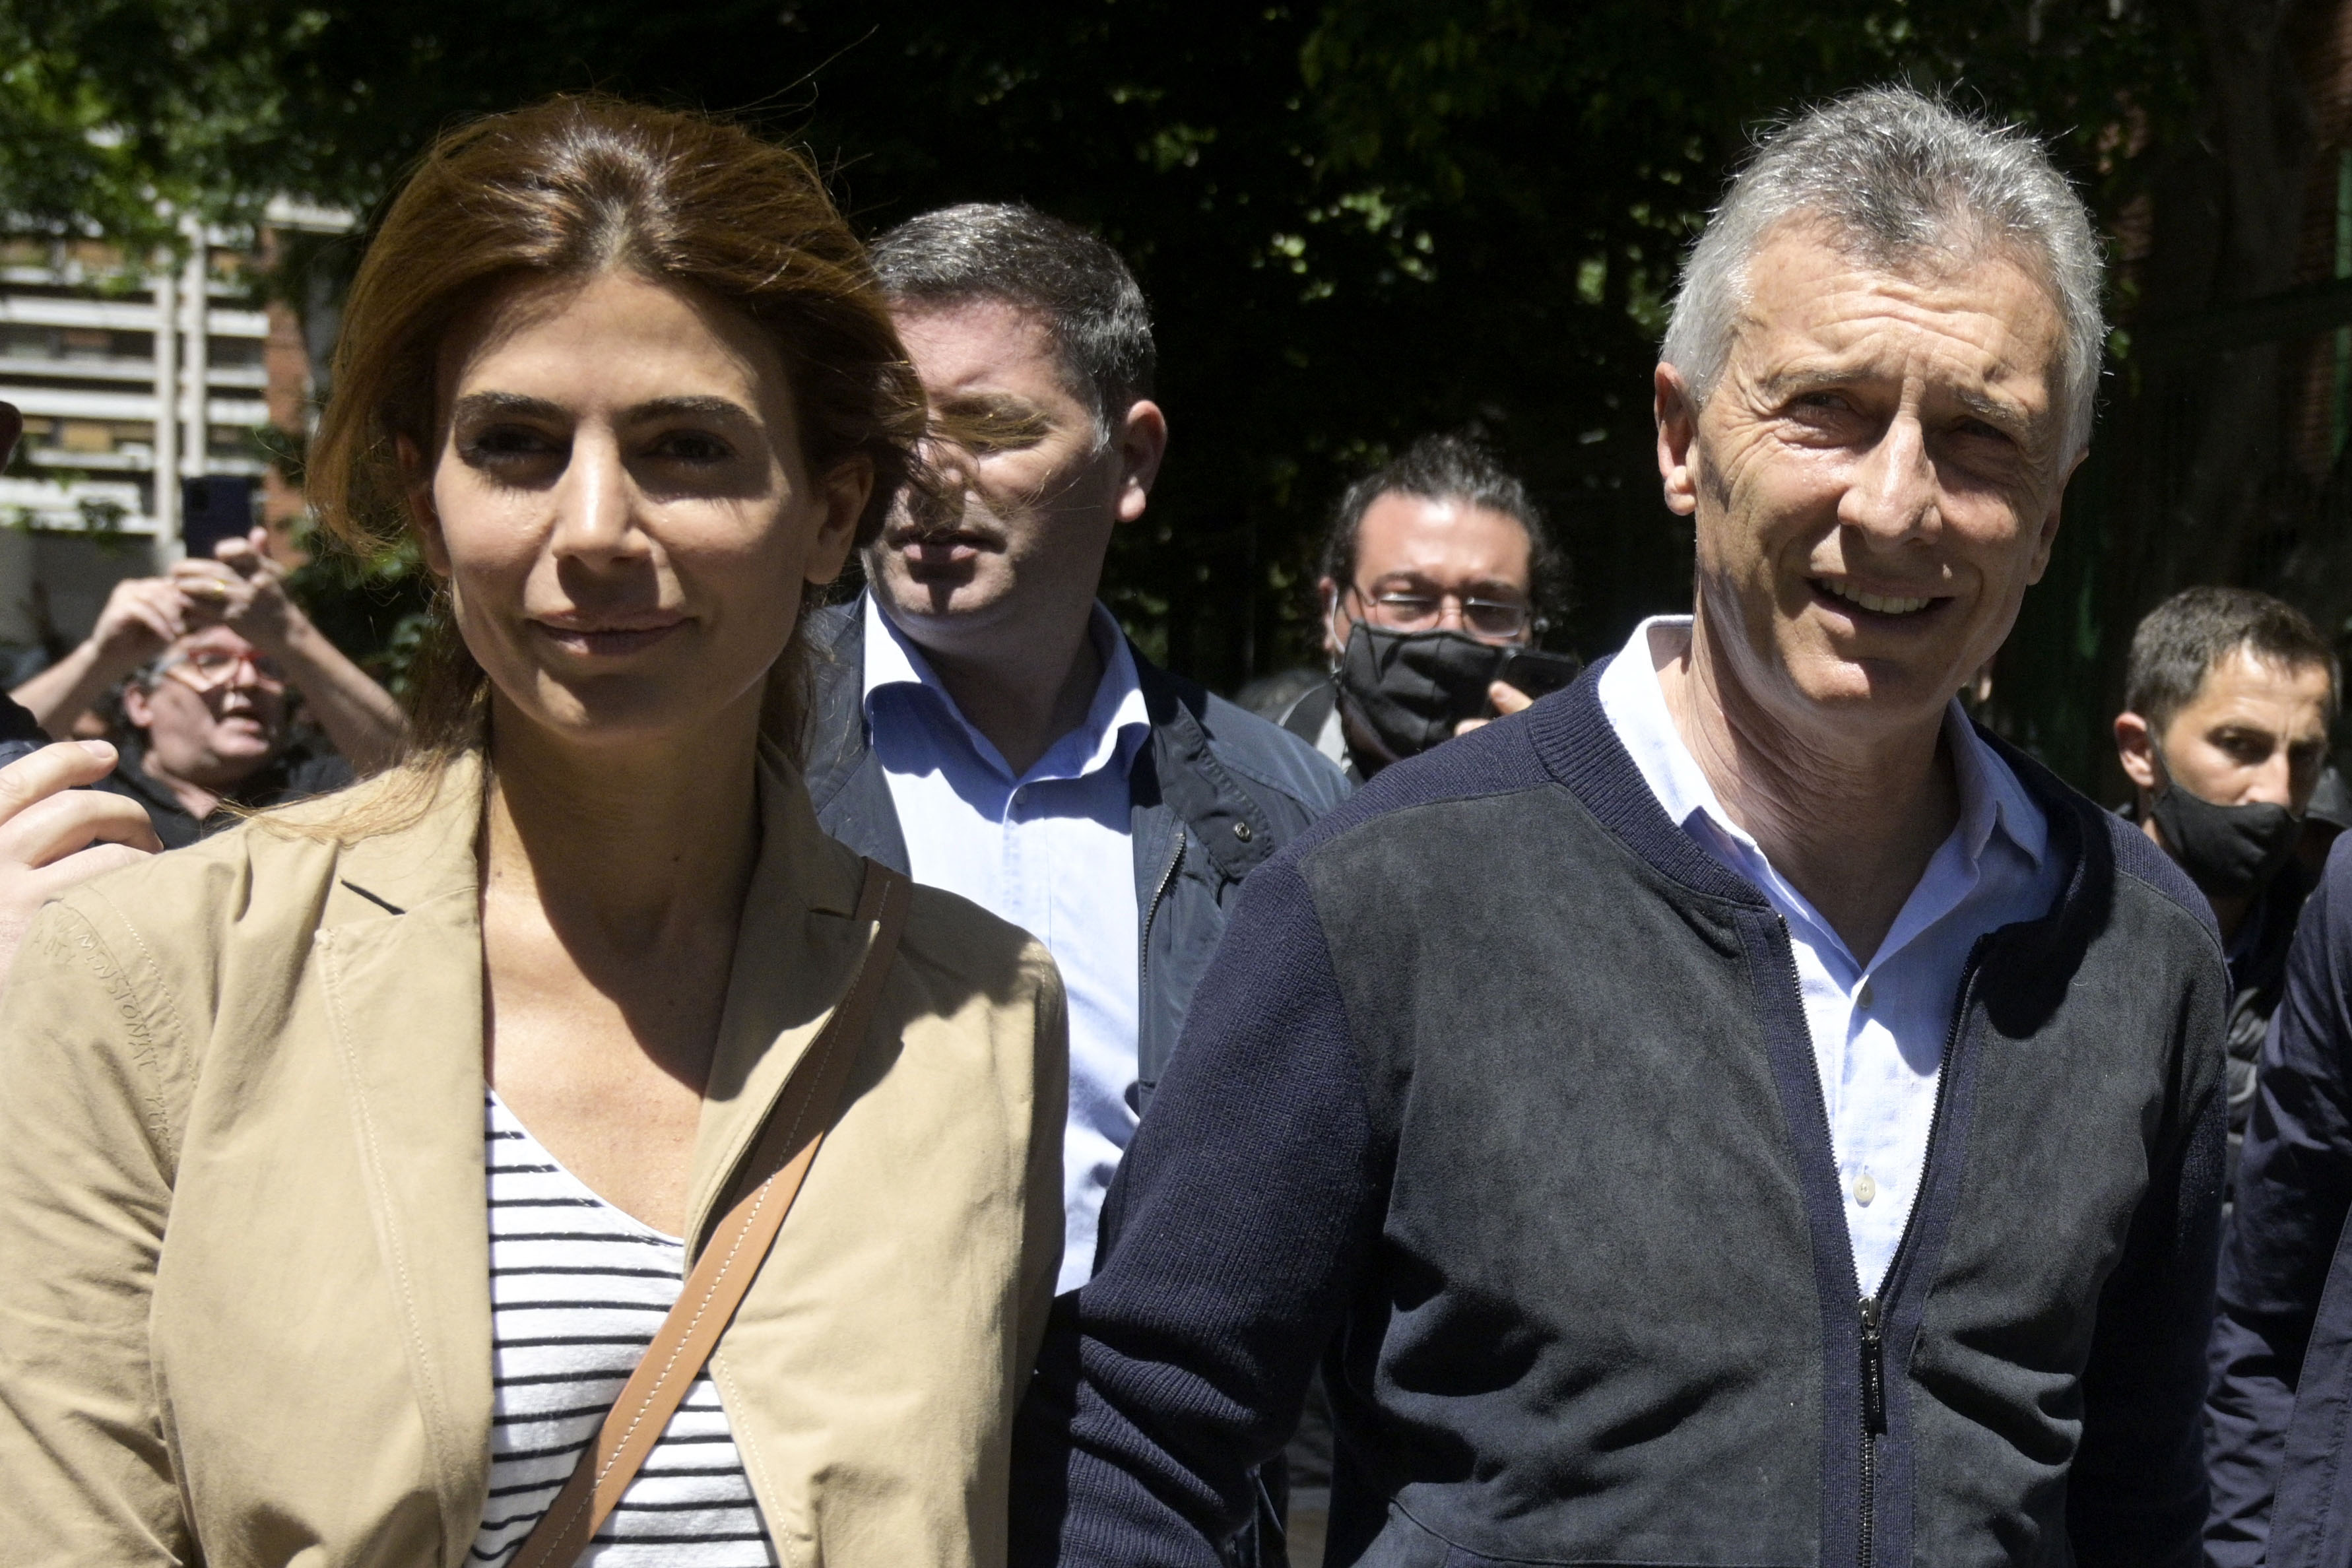 Argentina's former President Mauricio Macri (R), accompanied by his wife Juliana Awada (L), leaves the polling station after casting his vote during the mid-term parliamentary elections in Buenos Aires, on November 14, 2021. - Argentines head to the polls in mid-term parliamentary elections on Sunday that could see President Alberto Fernandez' party lose its Senate majority. (Photo by JUAN MABROMATA / AFP)